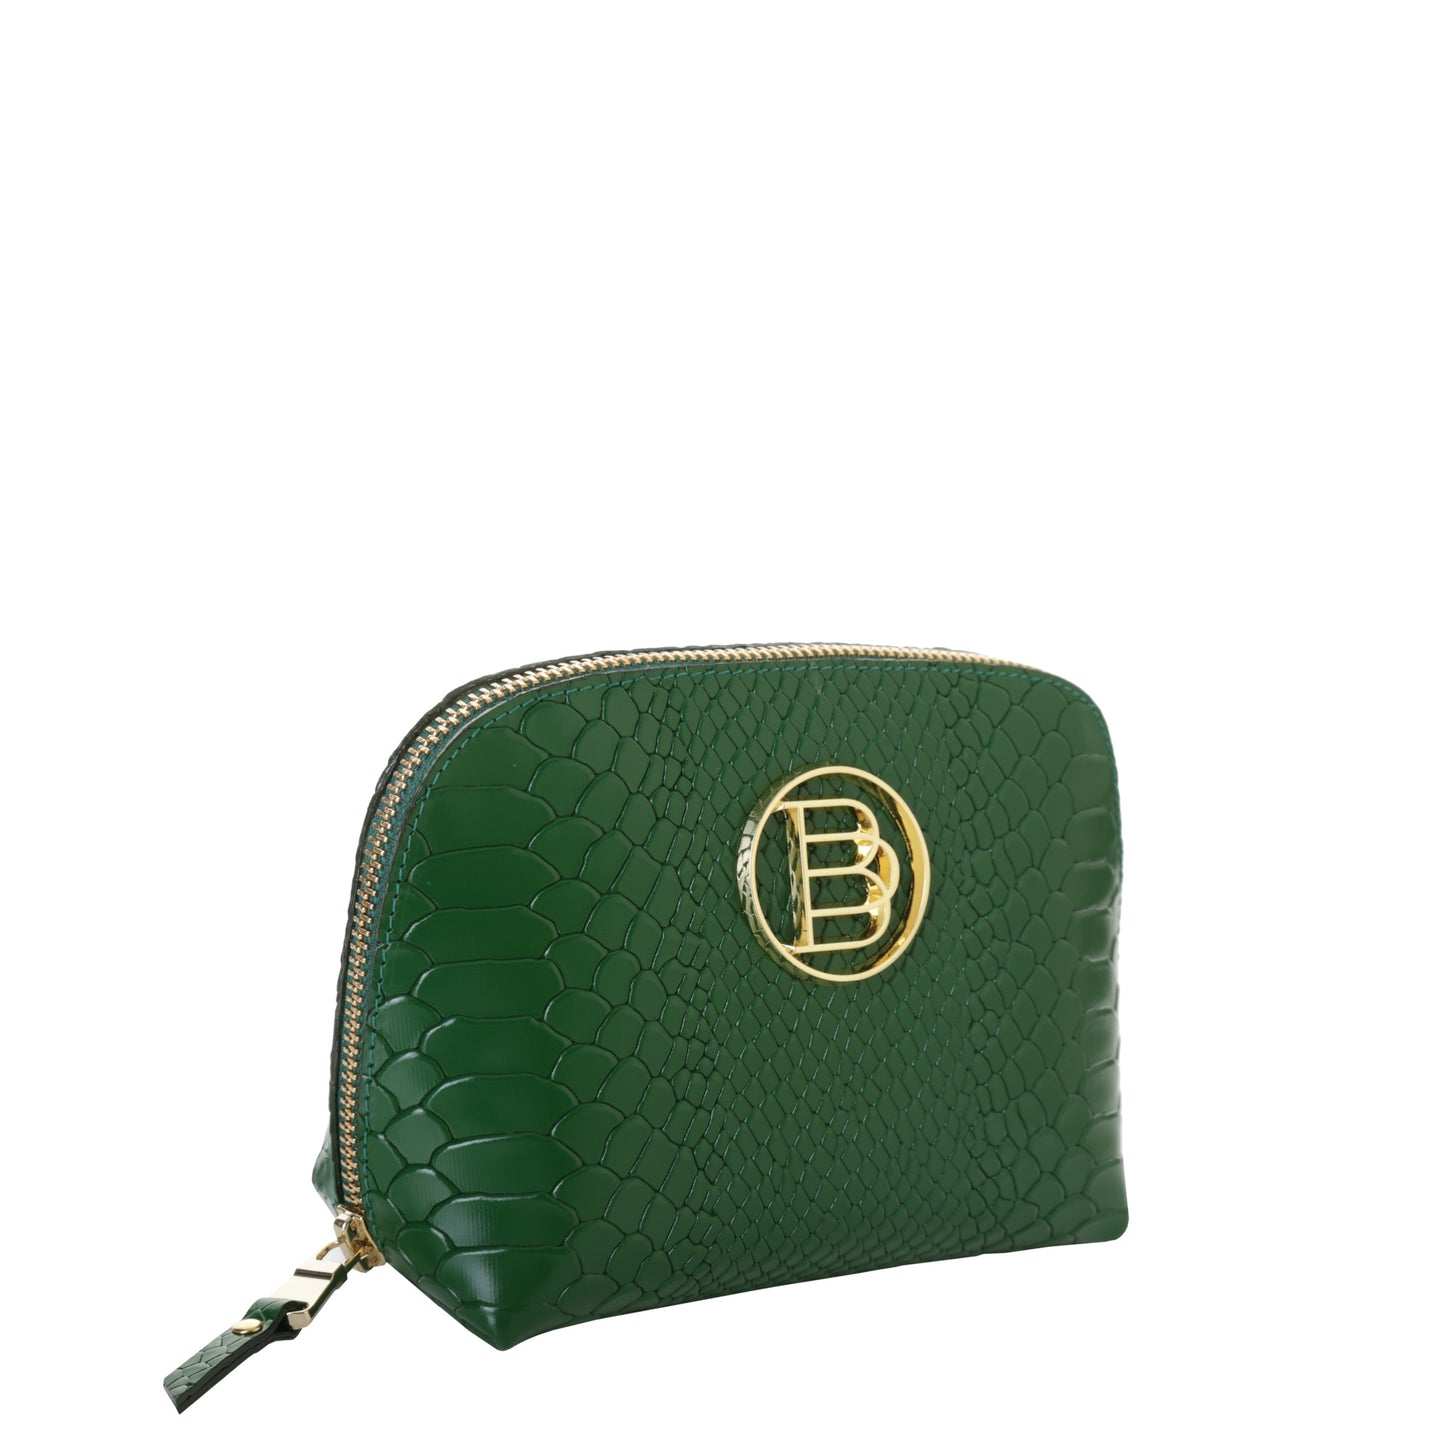 GREEN leather women's cosmetic bag